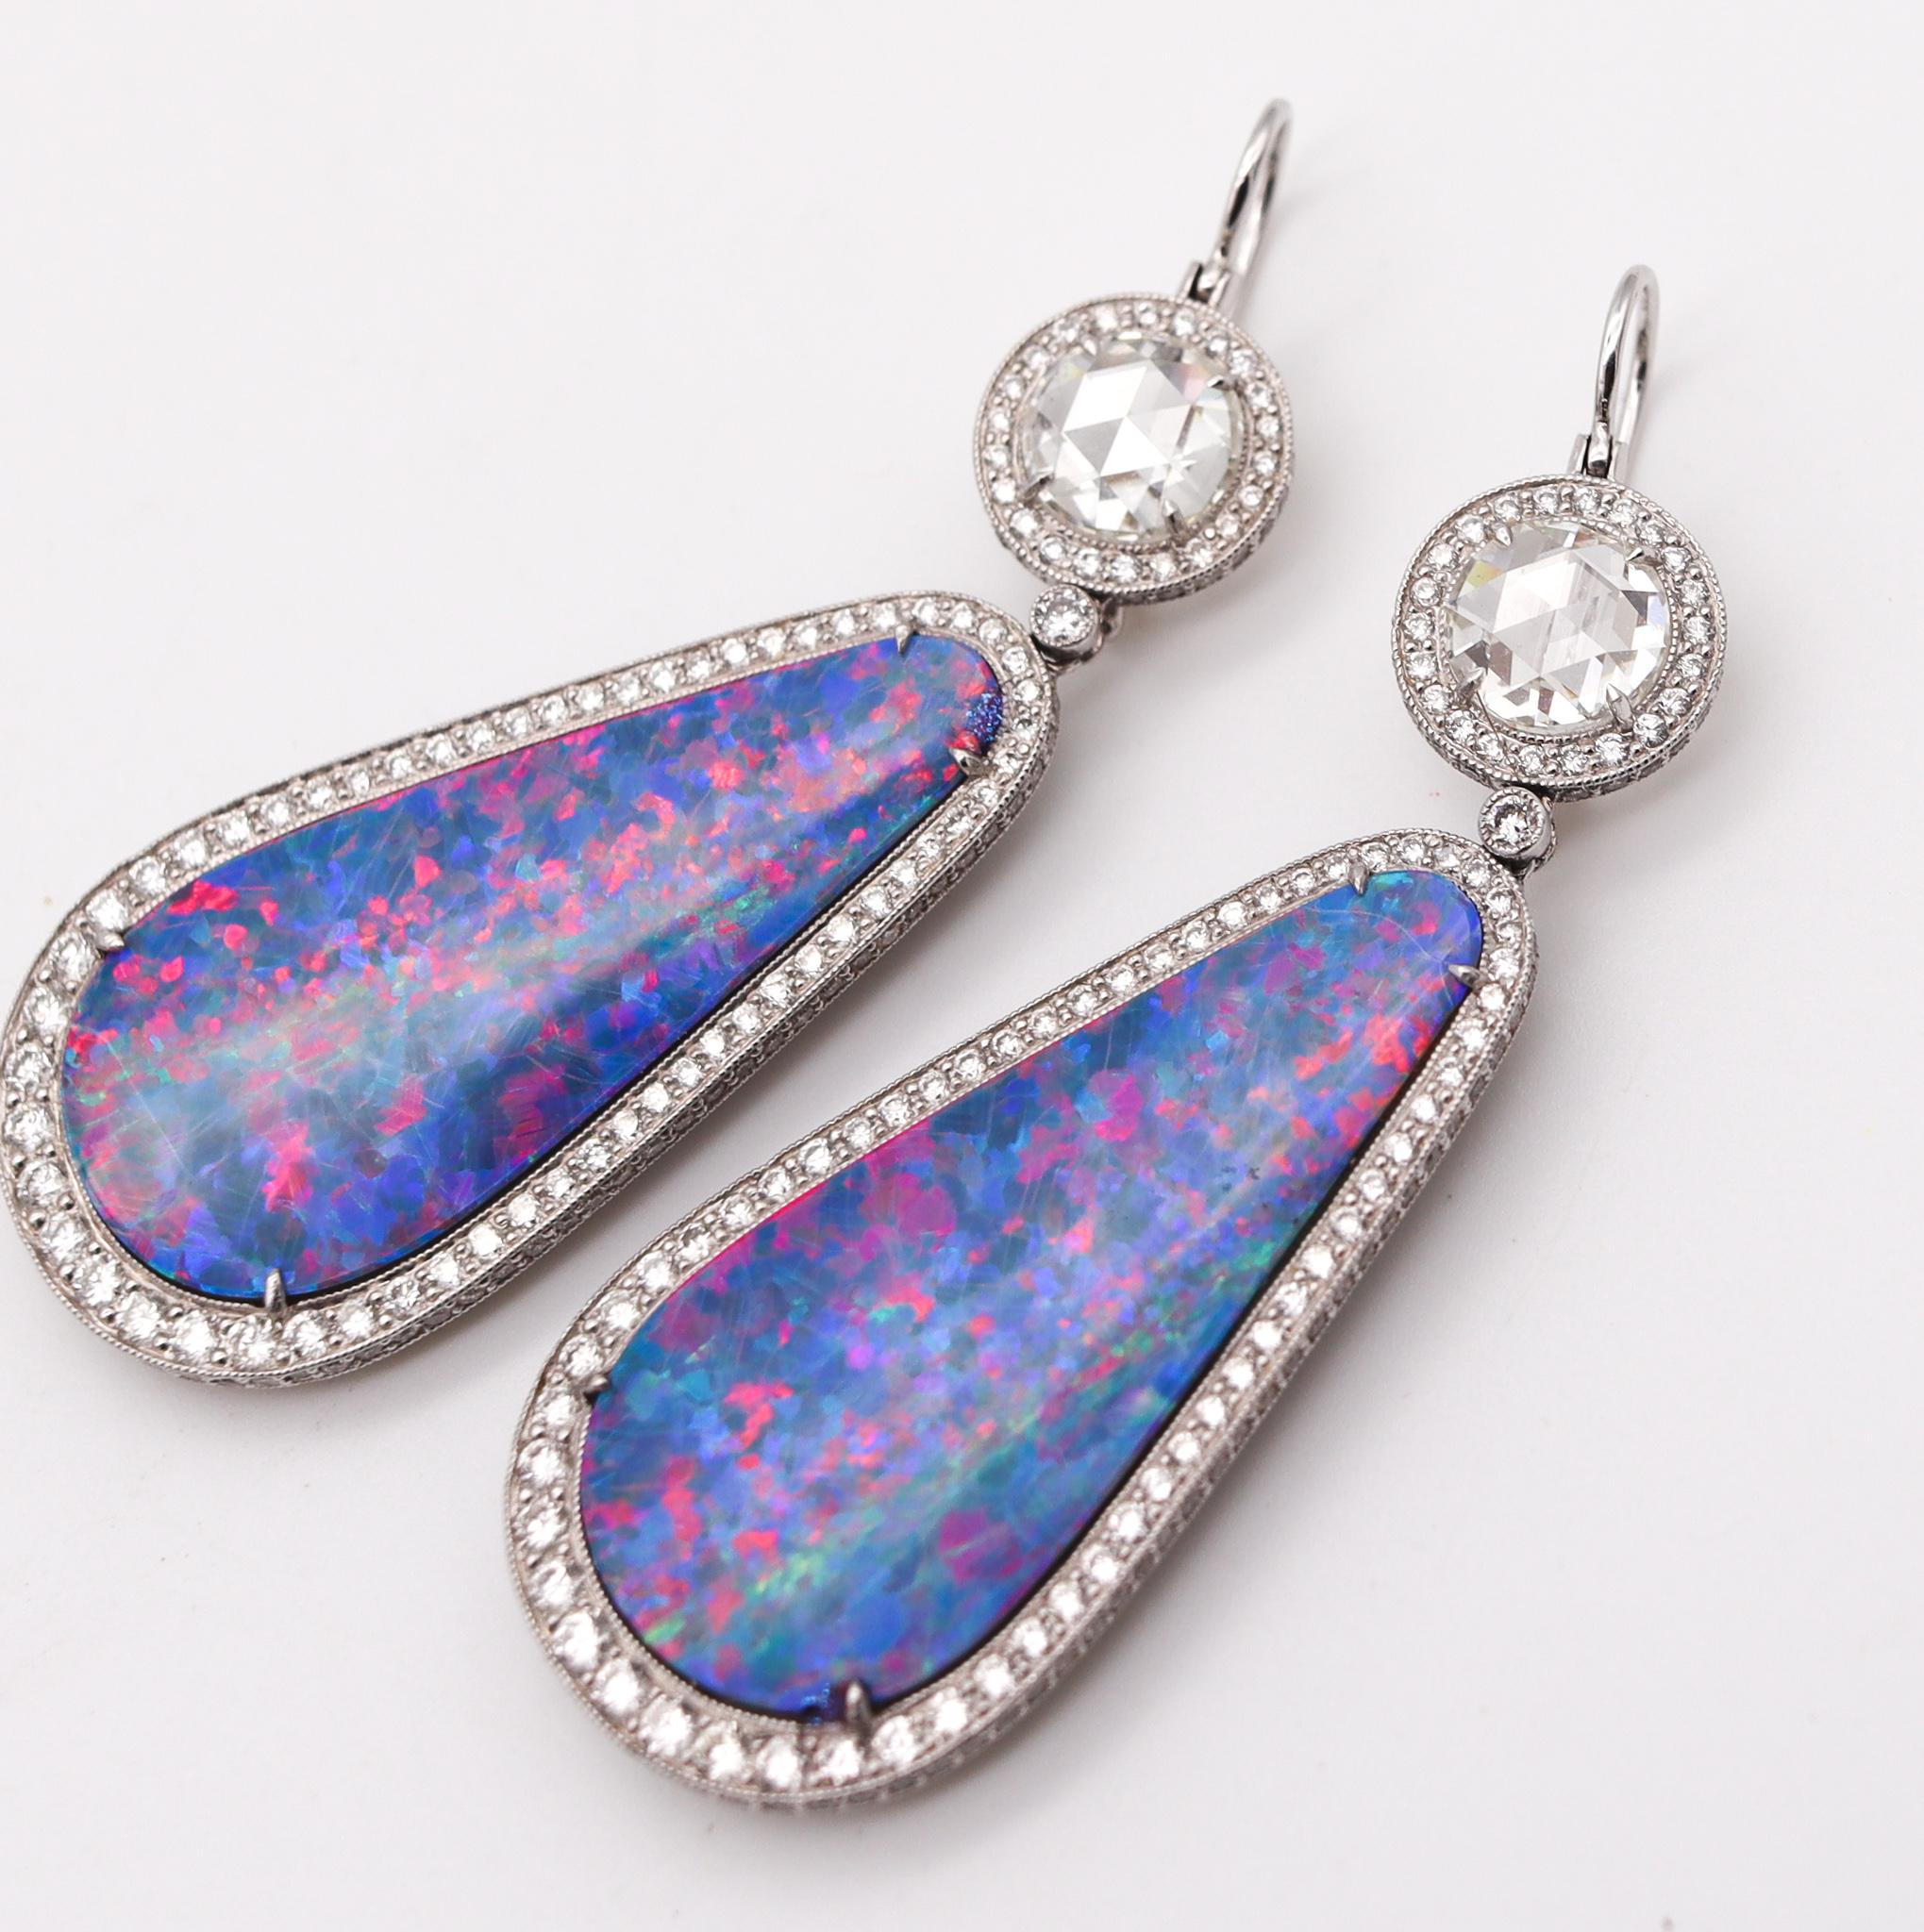 Classic Dangle Drops Earrings in Platinum with 31.37 Ctw of Diamonds and Opal In Excellent Condition For Sale In Miami, FL